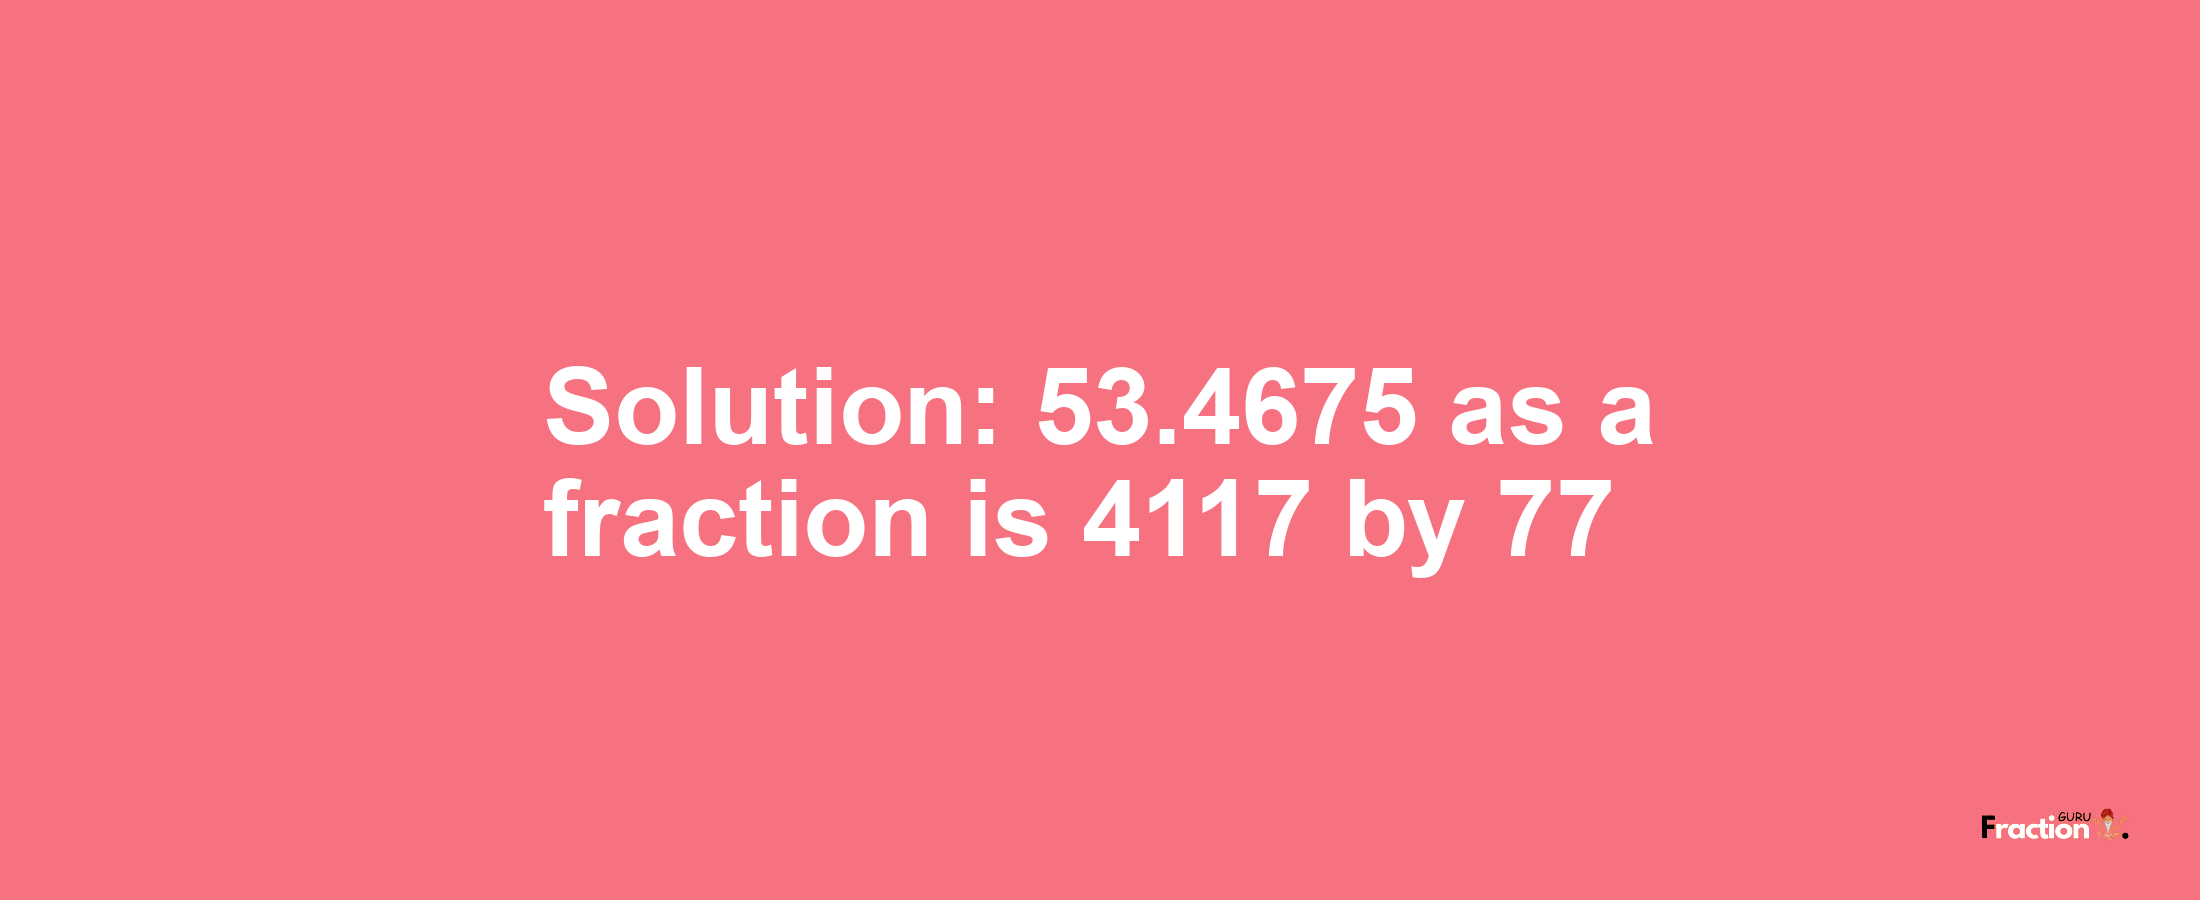 Solution:53.4675 as a fraction is 4117/77